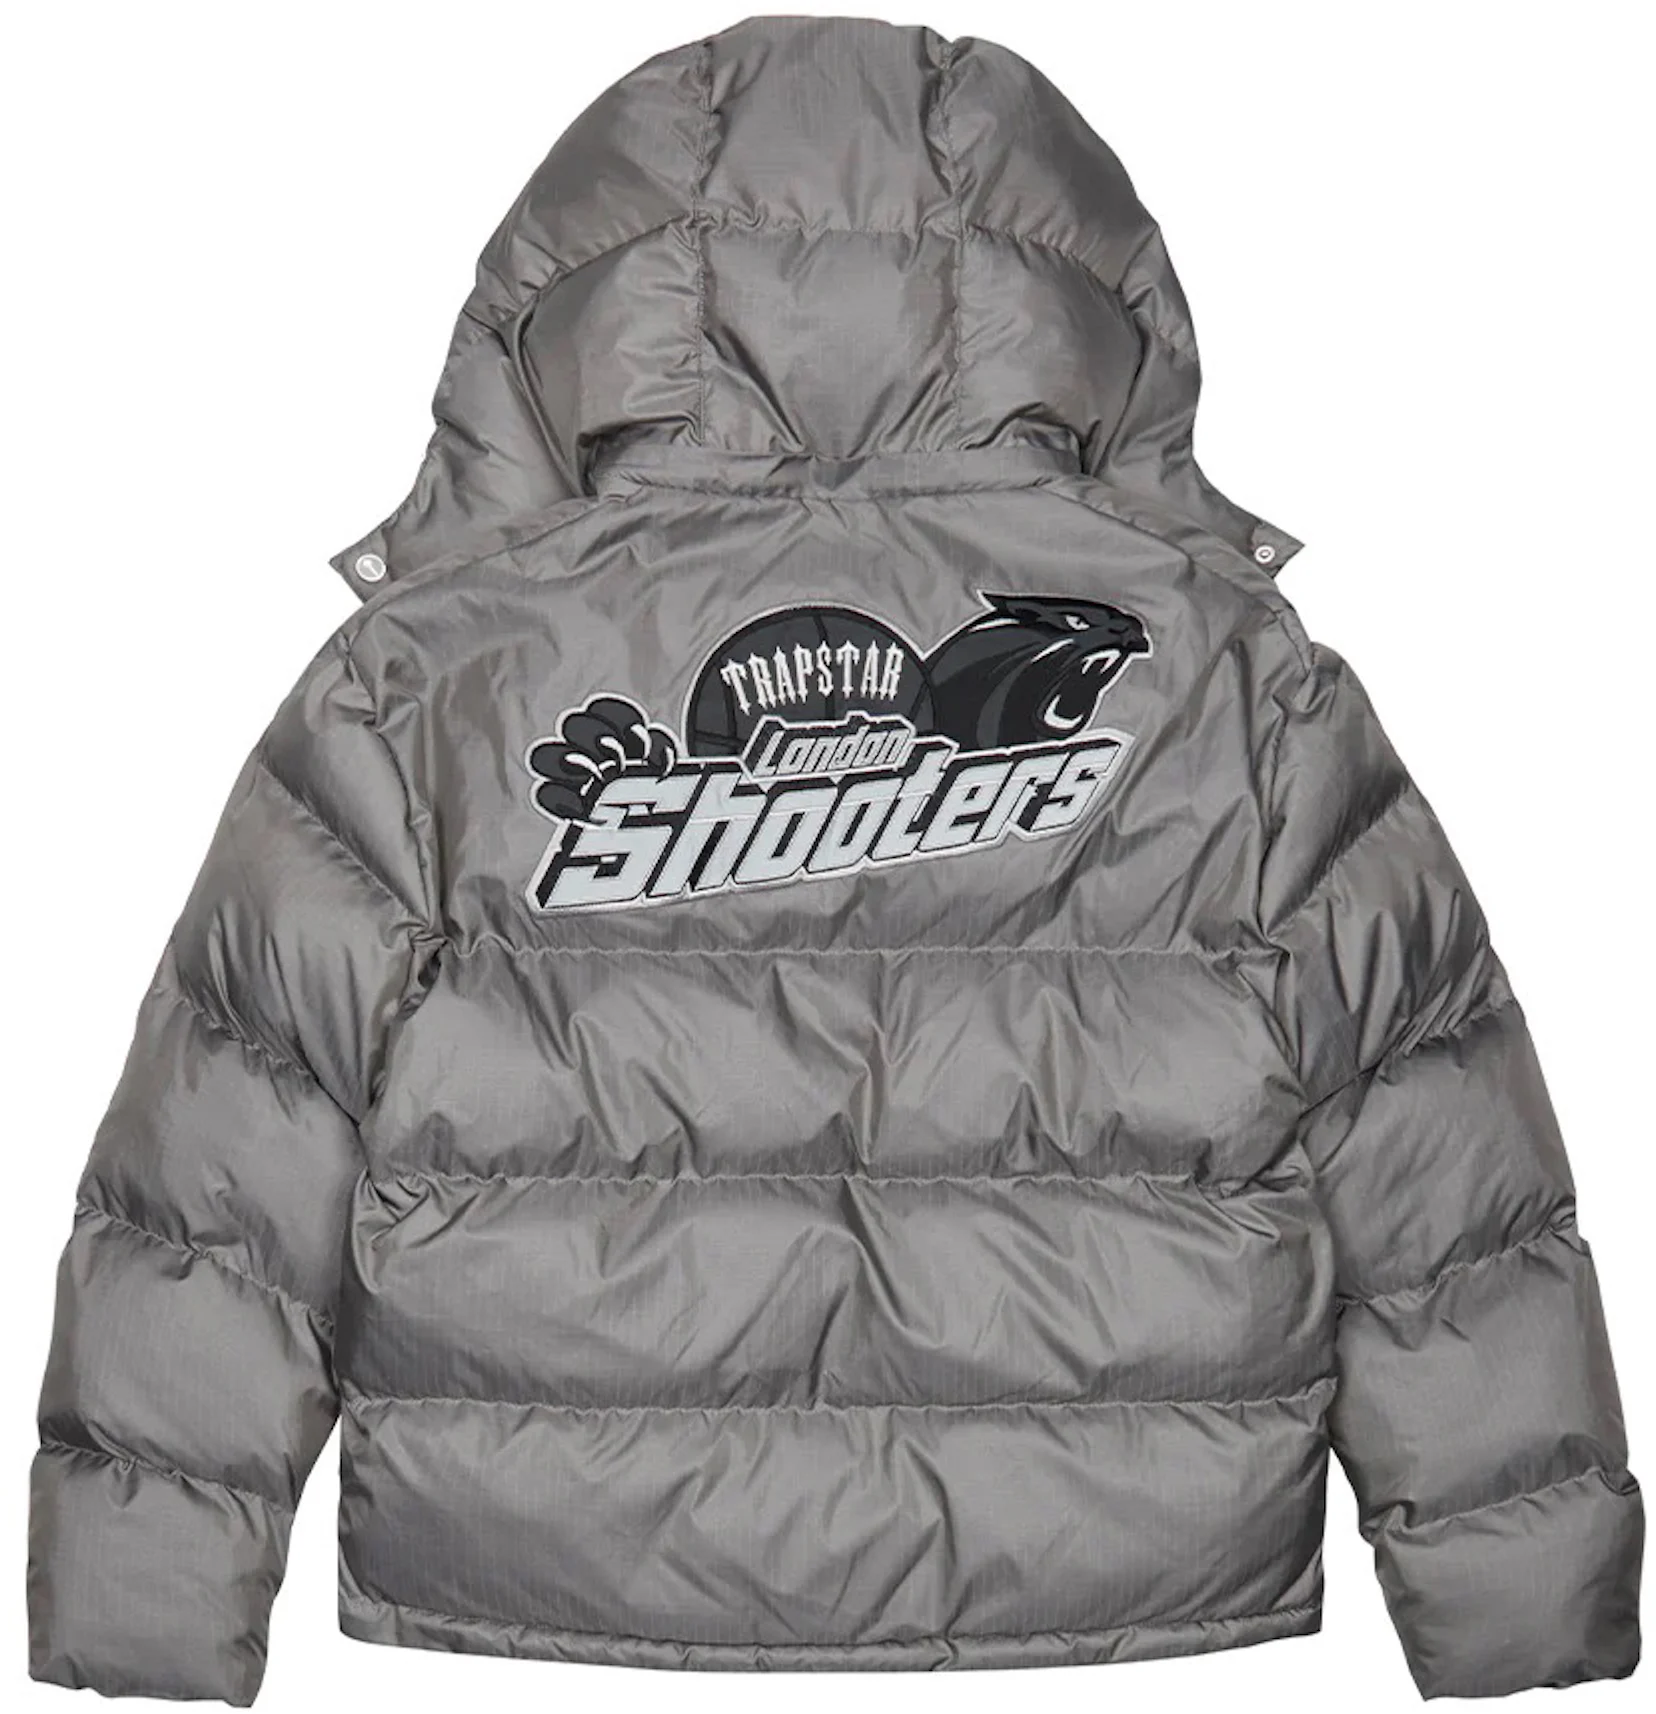 https://images.stockx.com/images/Trapstar-Shooters-Hooded-Puffer-Grey.jpg?fit=fill&bg=FFFFFF&w=1200&h=857&fm=webp&auto=compress&dpr=2&trim=color&updated_at=1673460326&q=60